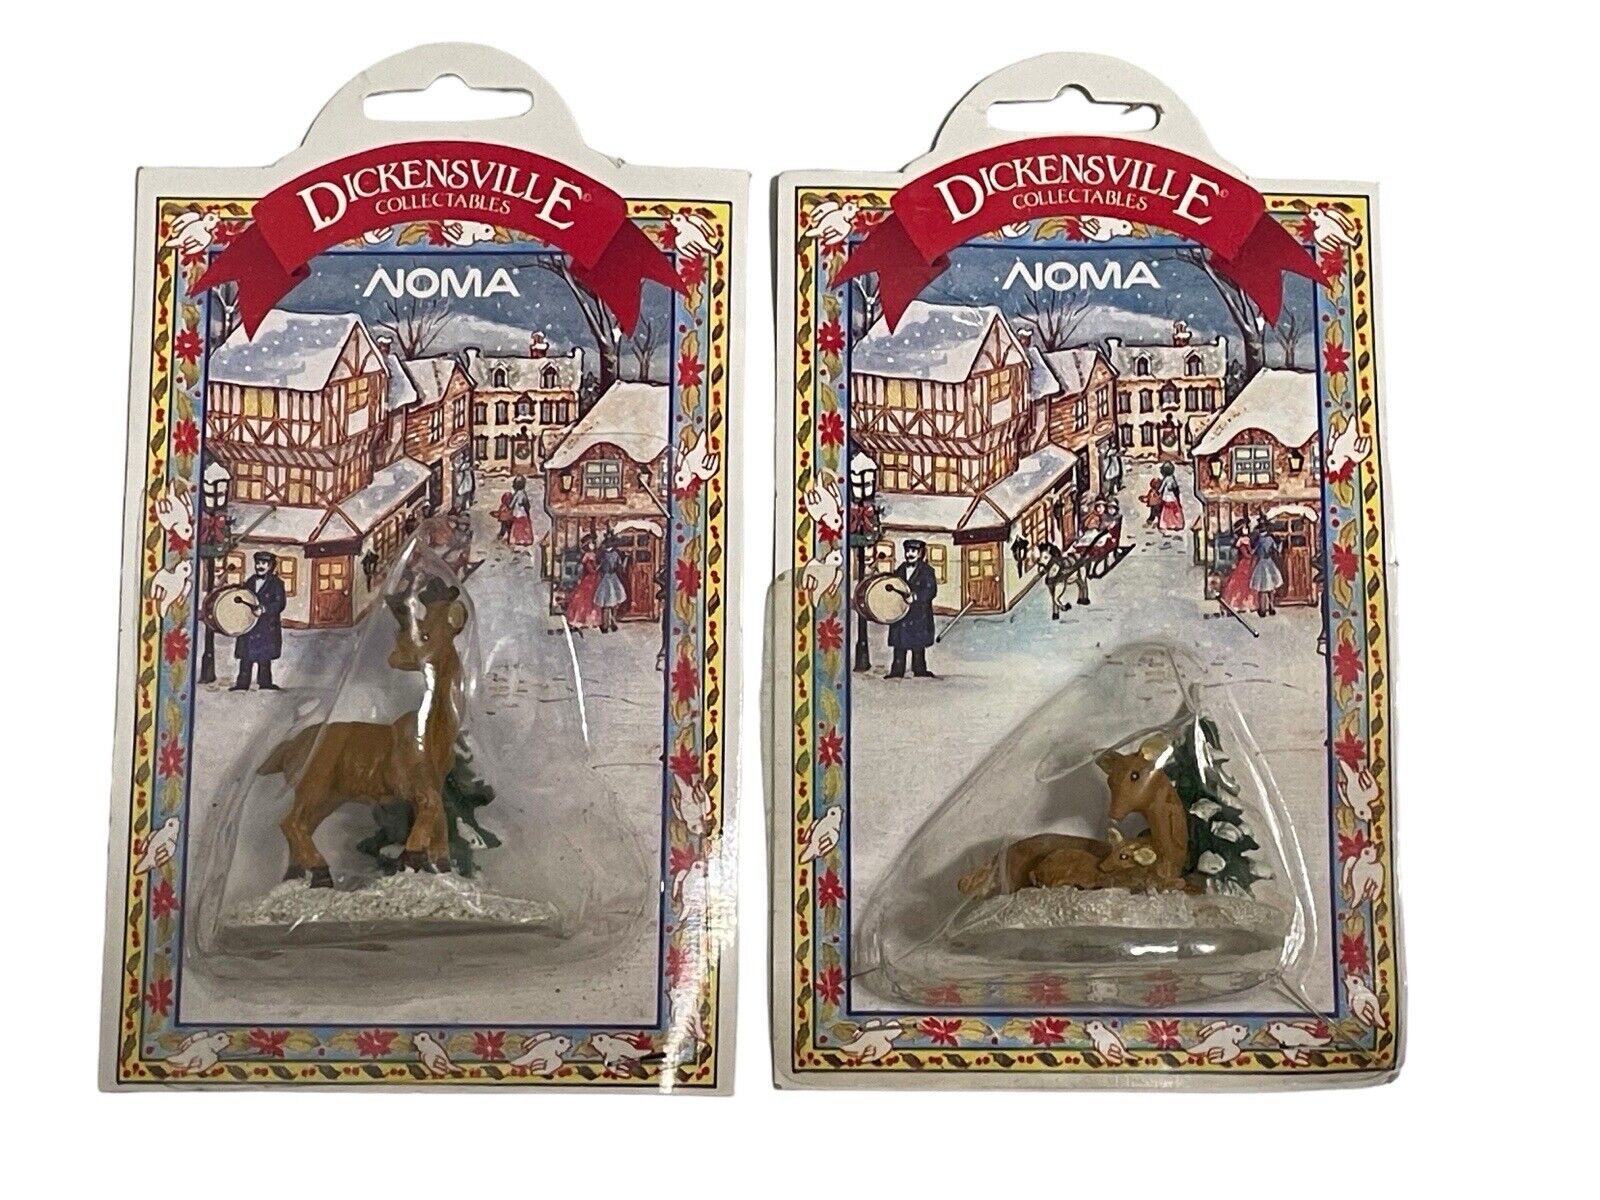 Noma Dickensville Collectibles Christmas Village Figurine Male Female & Doe Deer